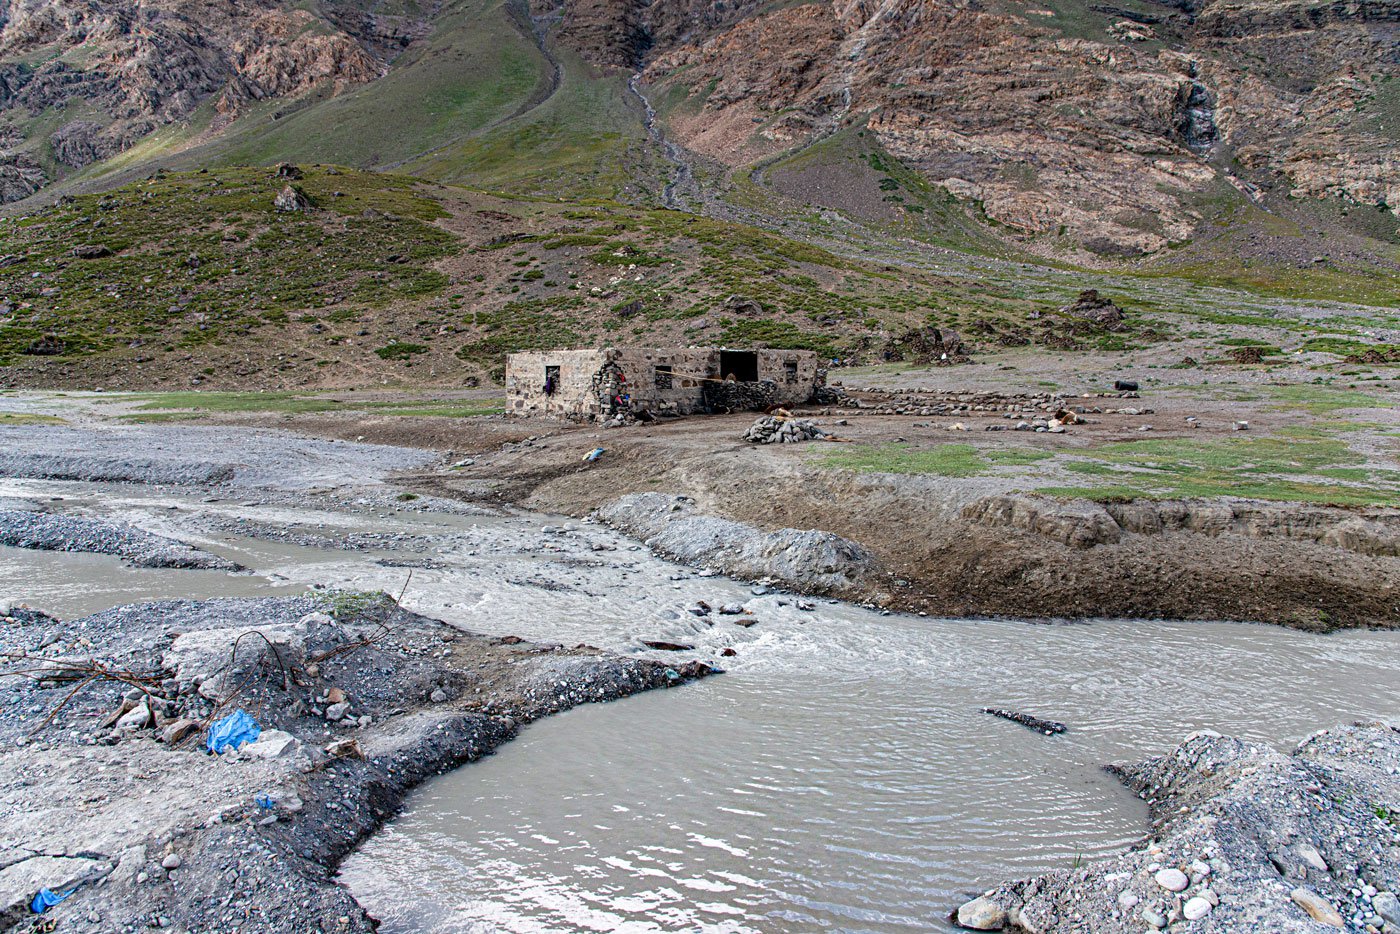 The pastoralists stay in a doksa when they migrate up the valley in summers. Also, known as goth and mani , they are built using mud and stones found around